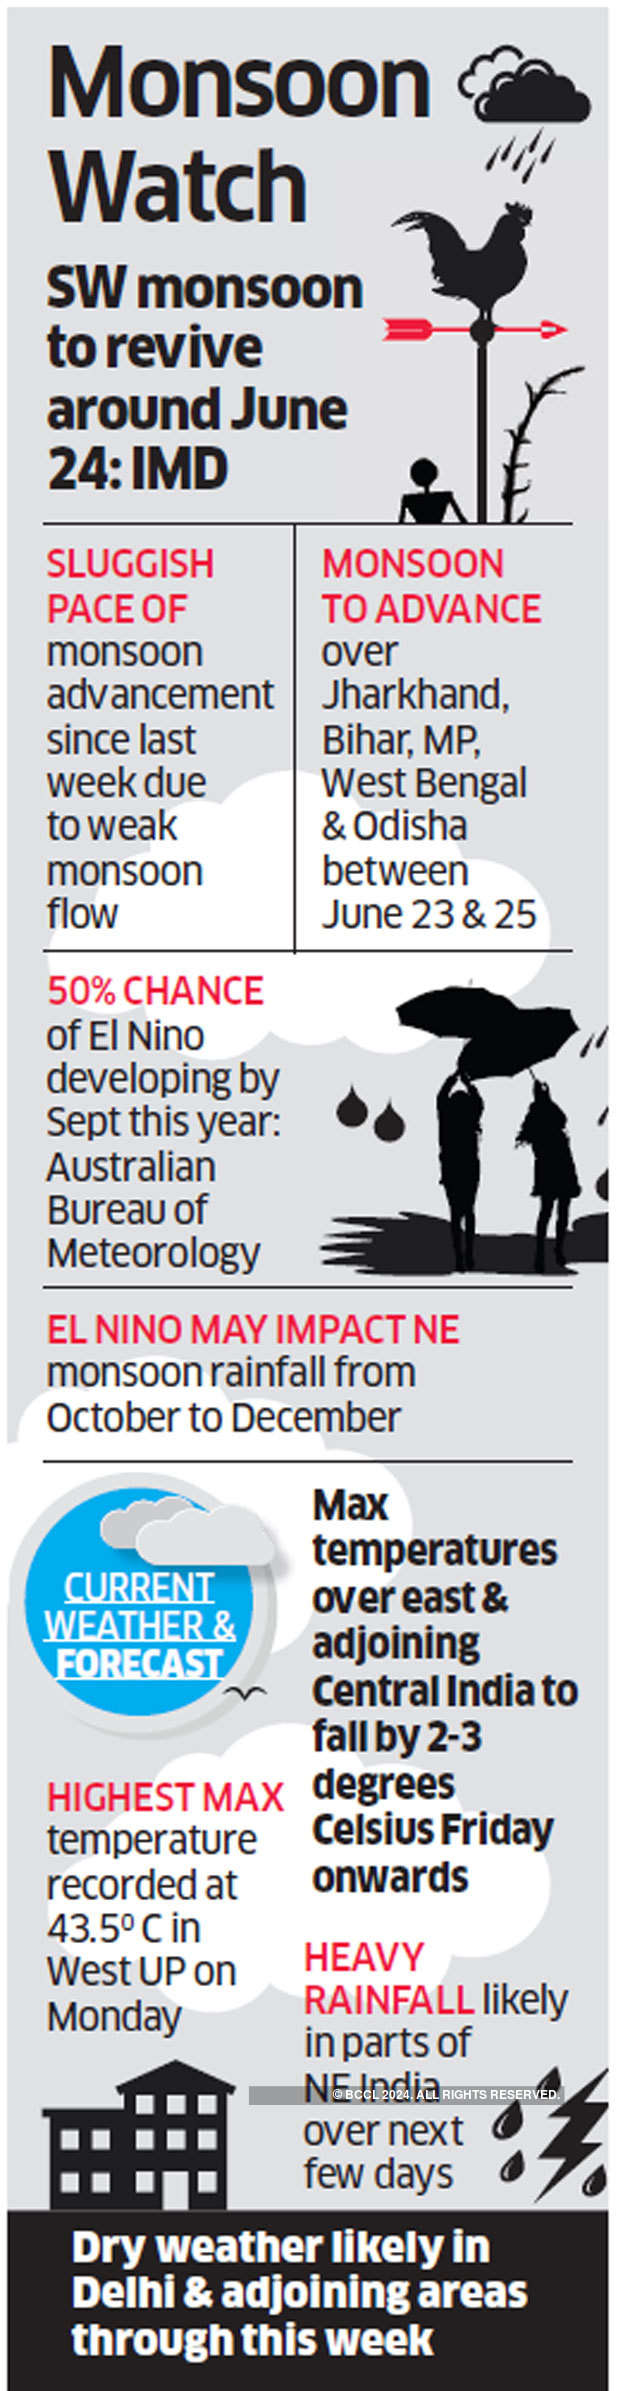 A Looming El Niño Could Dry the